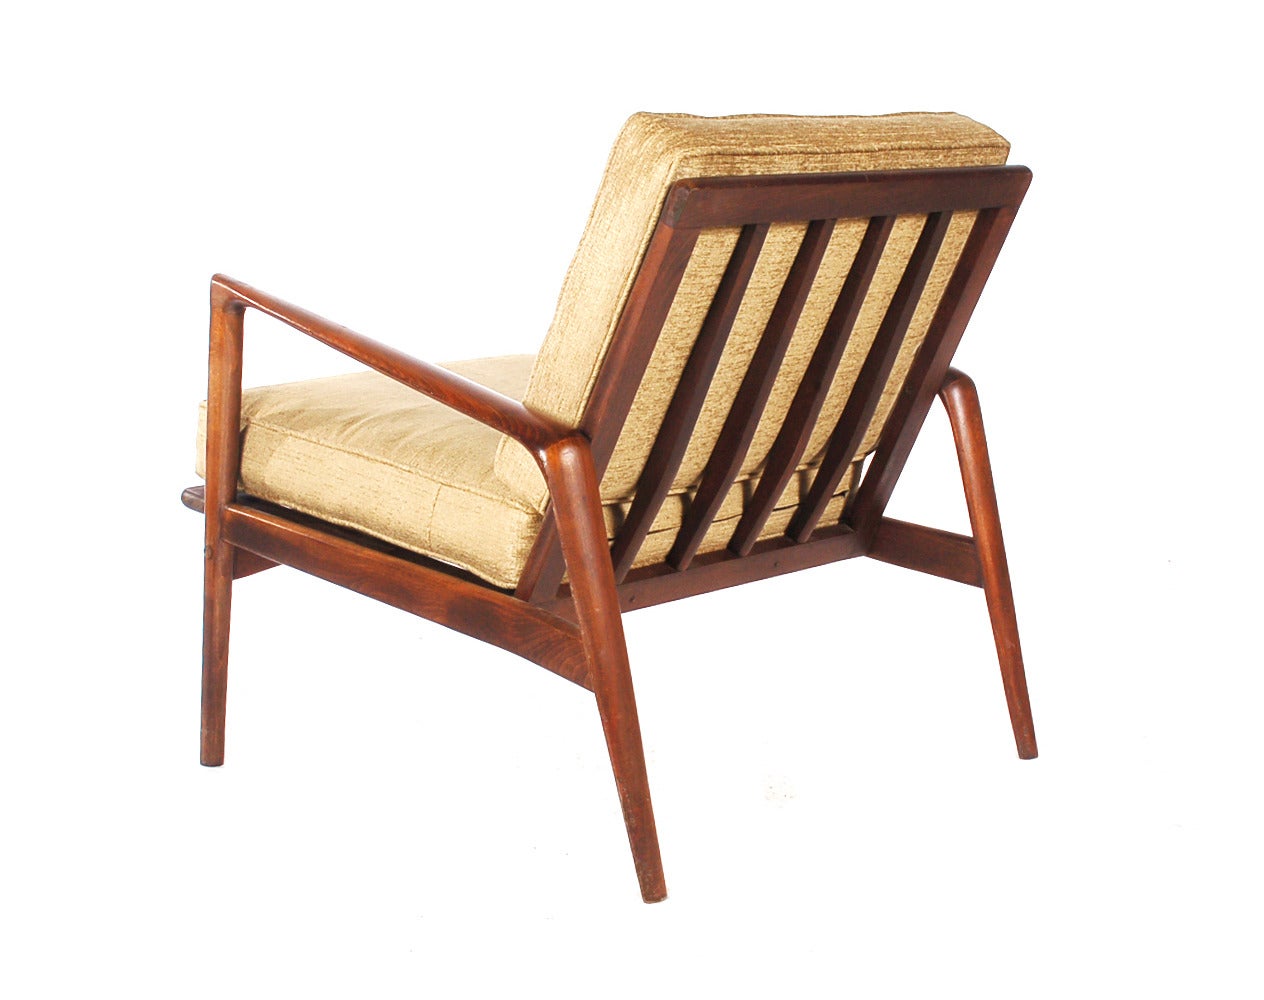 A very nice Scandinavian influenced lounge chair circa 1960's. It features solid walnut frame with gold fabric cushions. Marked: Made in Italy